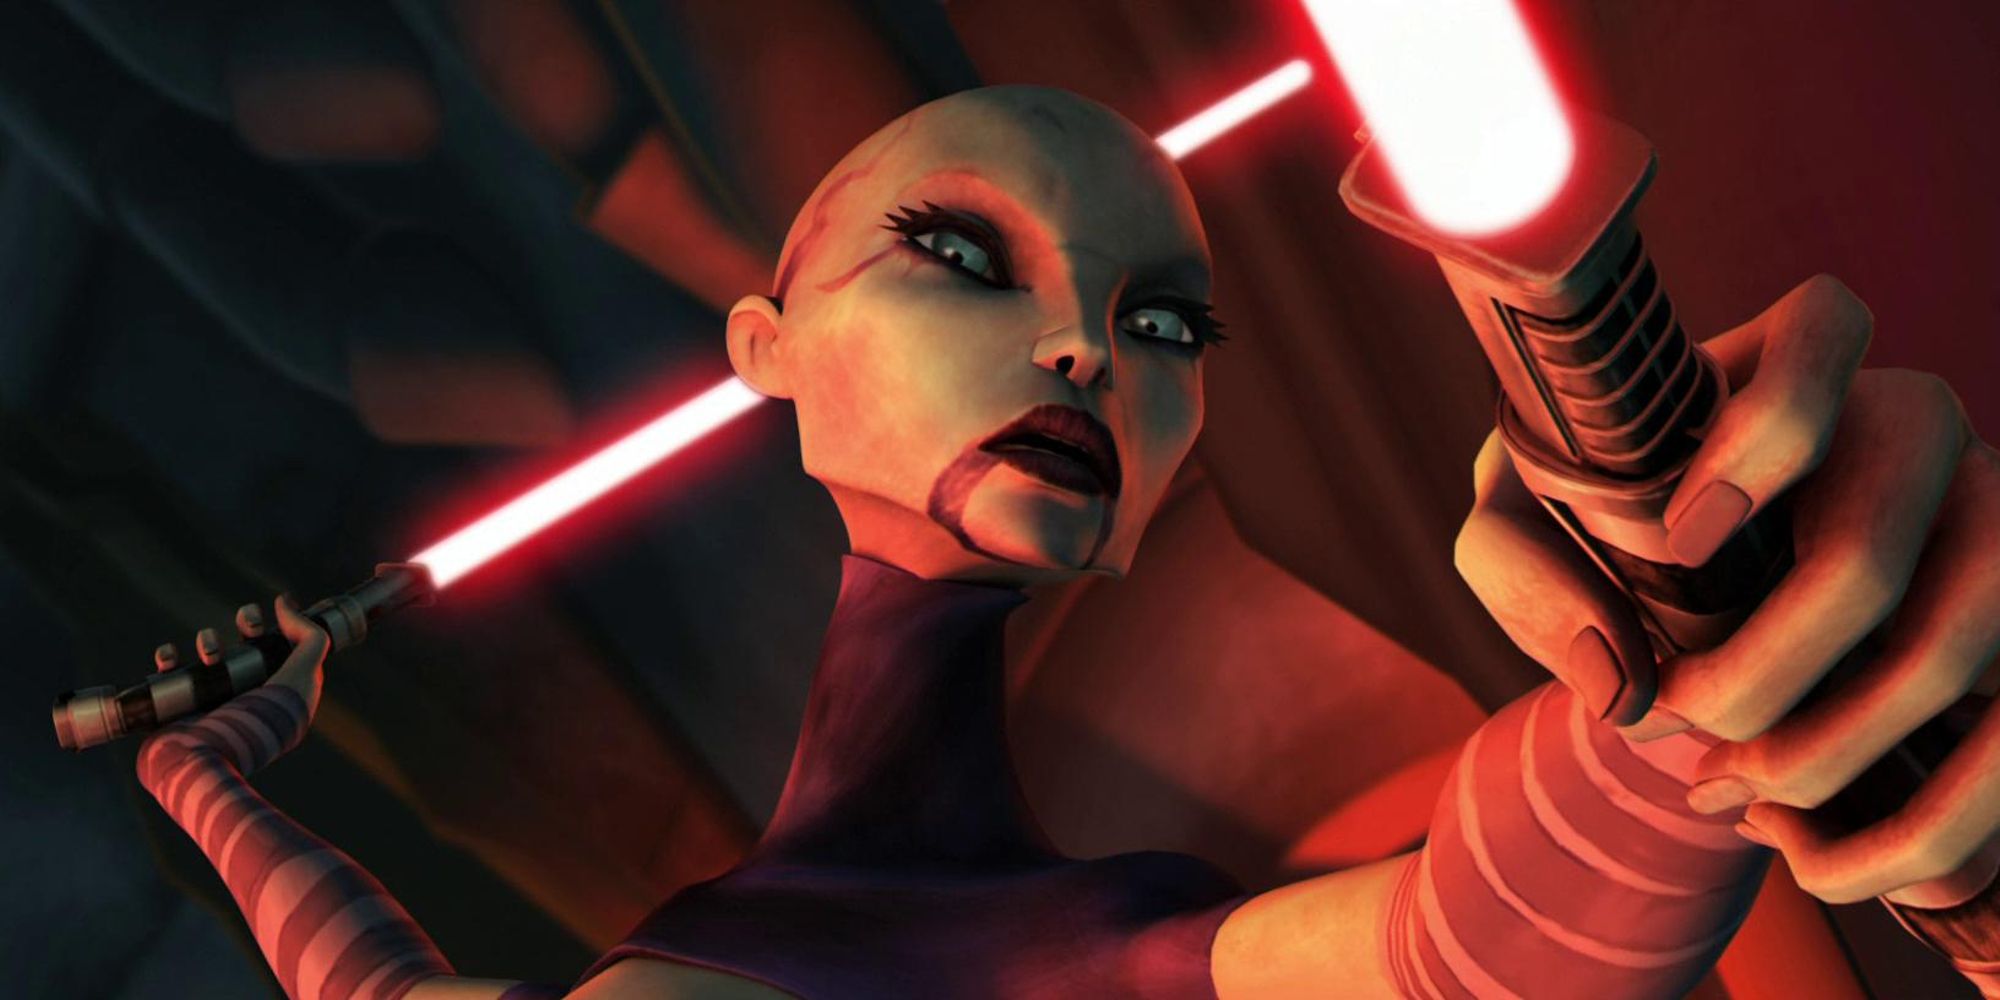 Asajj Ventress with her twin lightsabers in Star Wars: The Clone Wars.